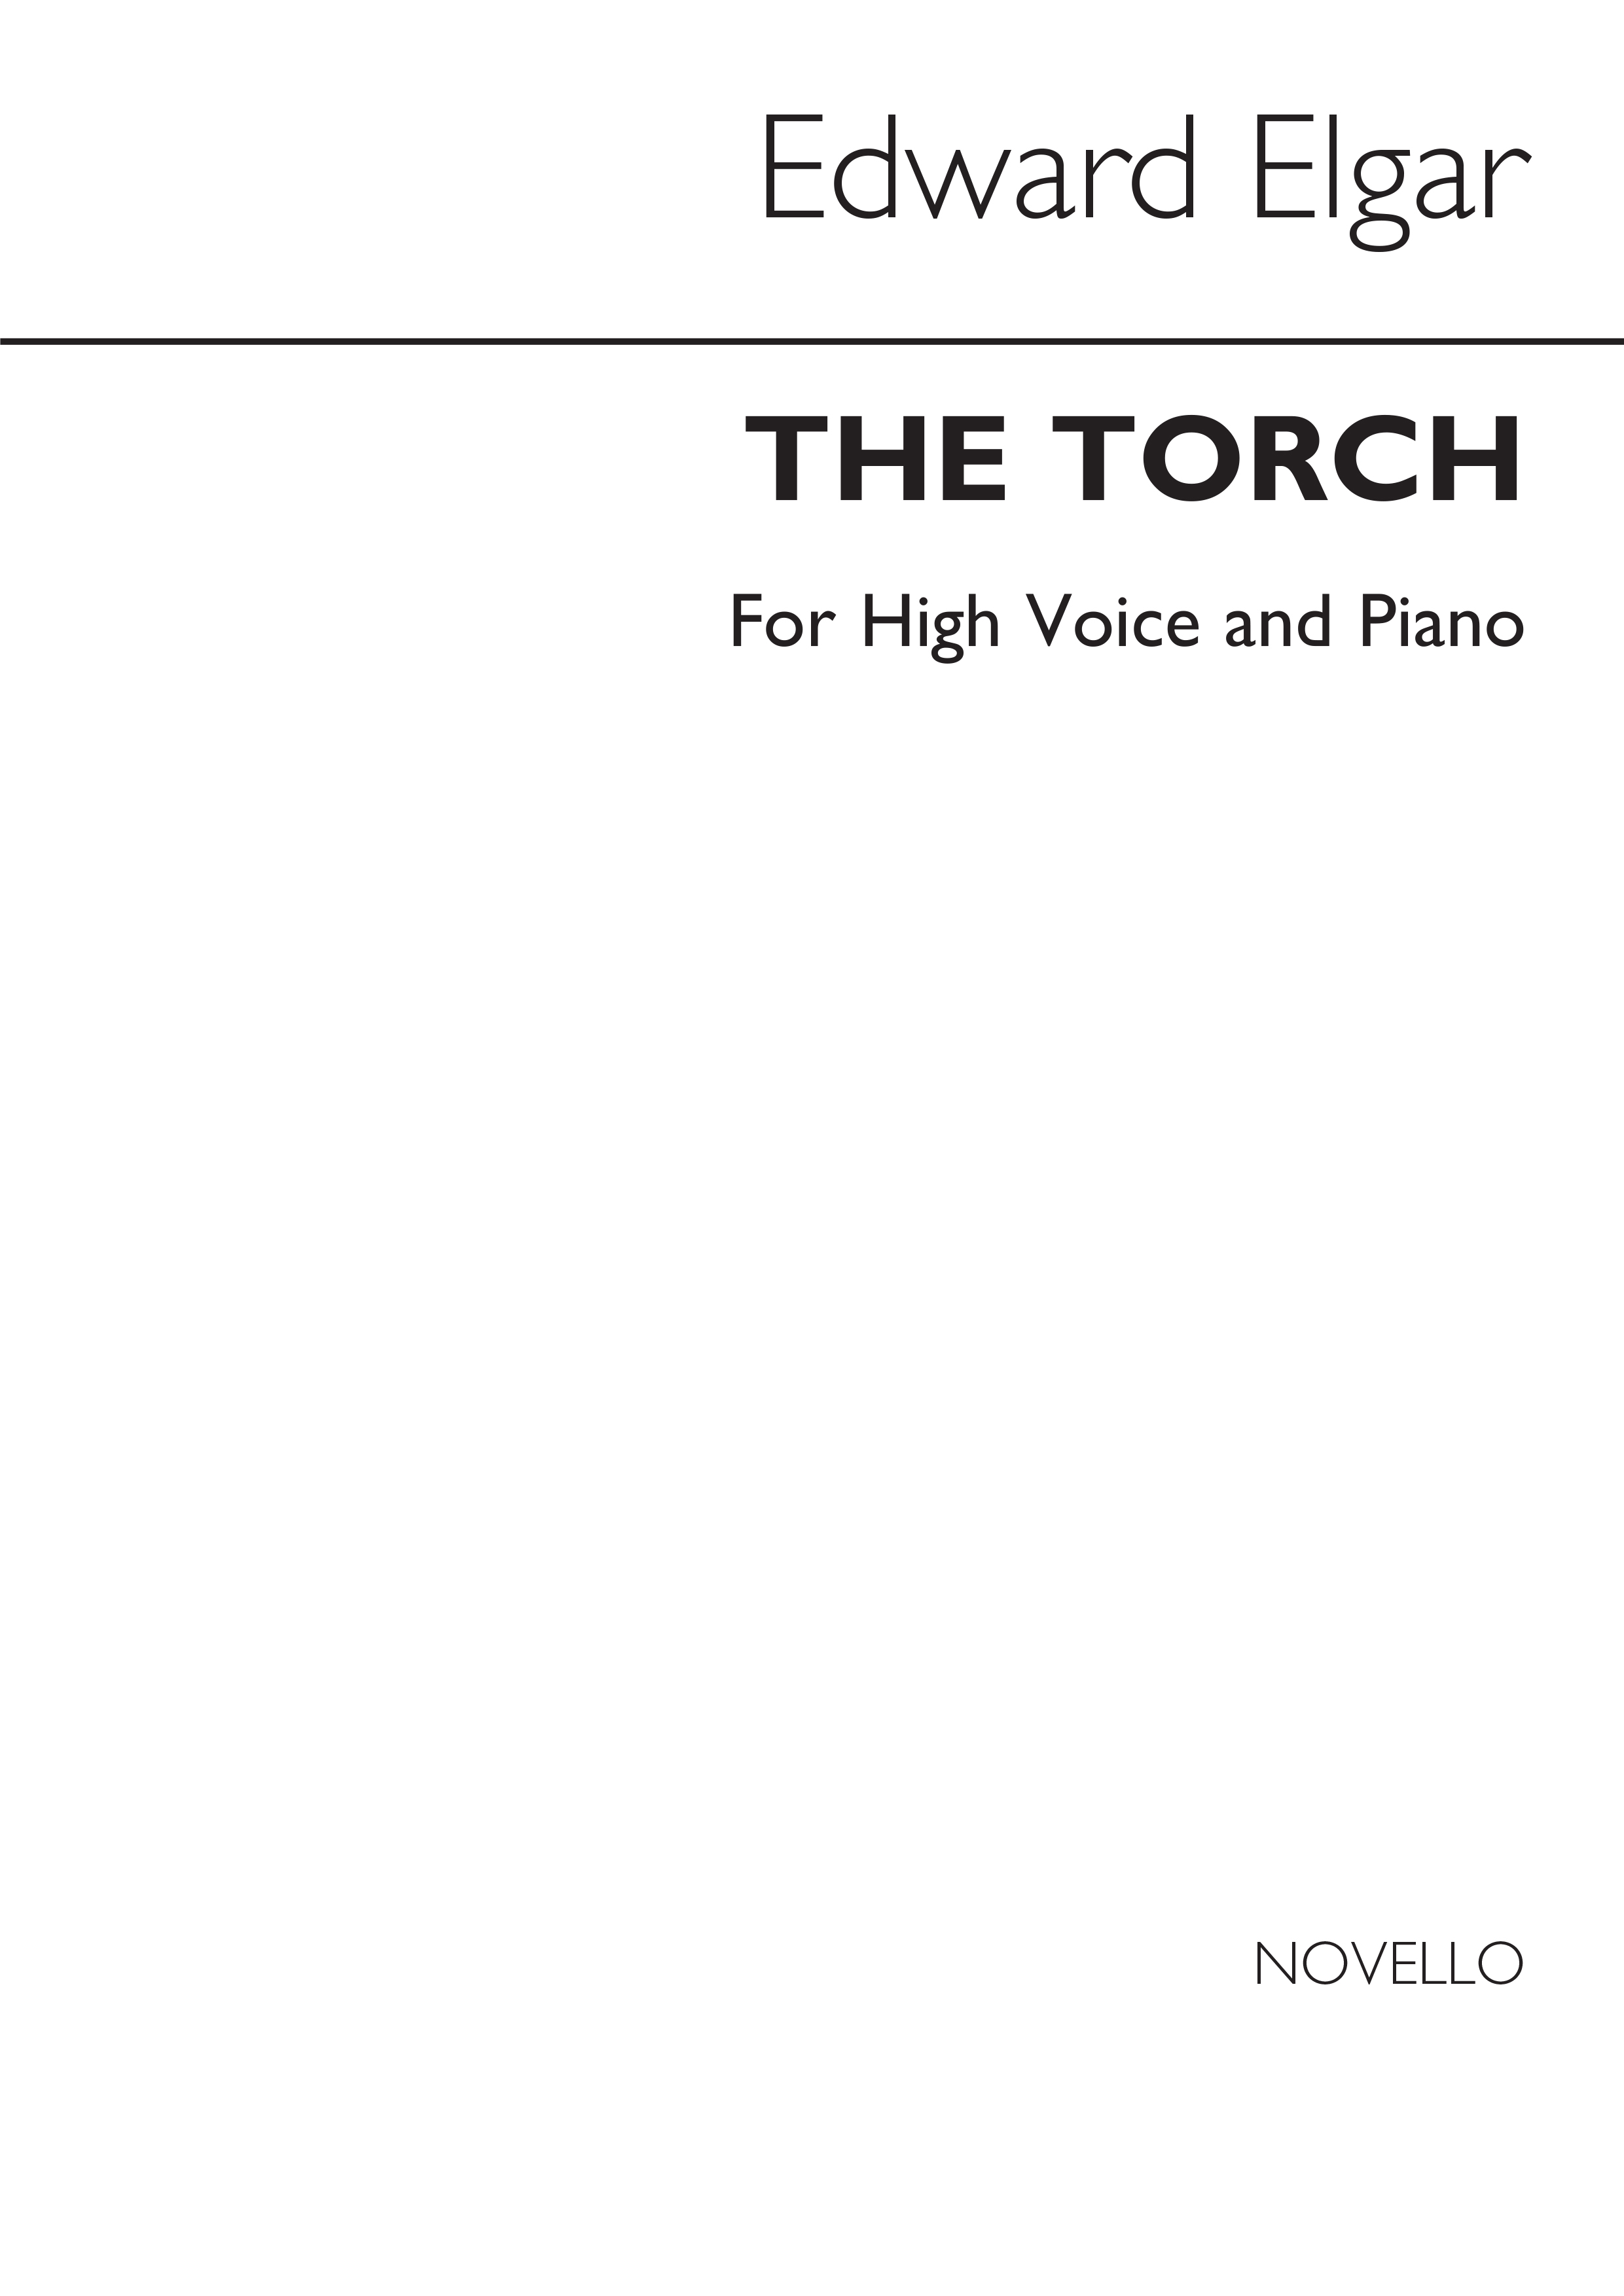 Elgar: Torch In A for High Voice and Piano